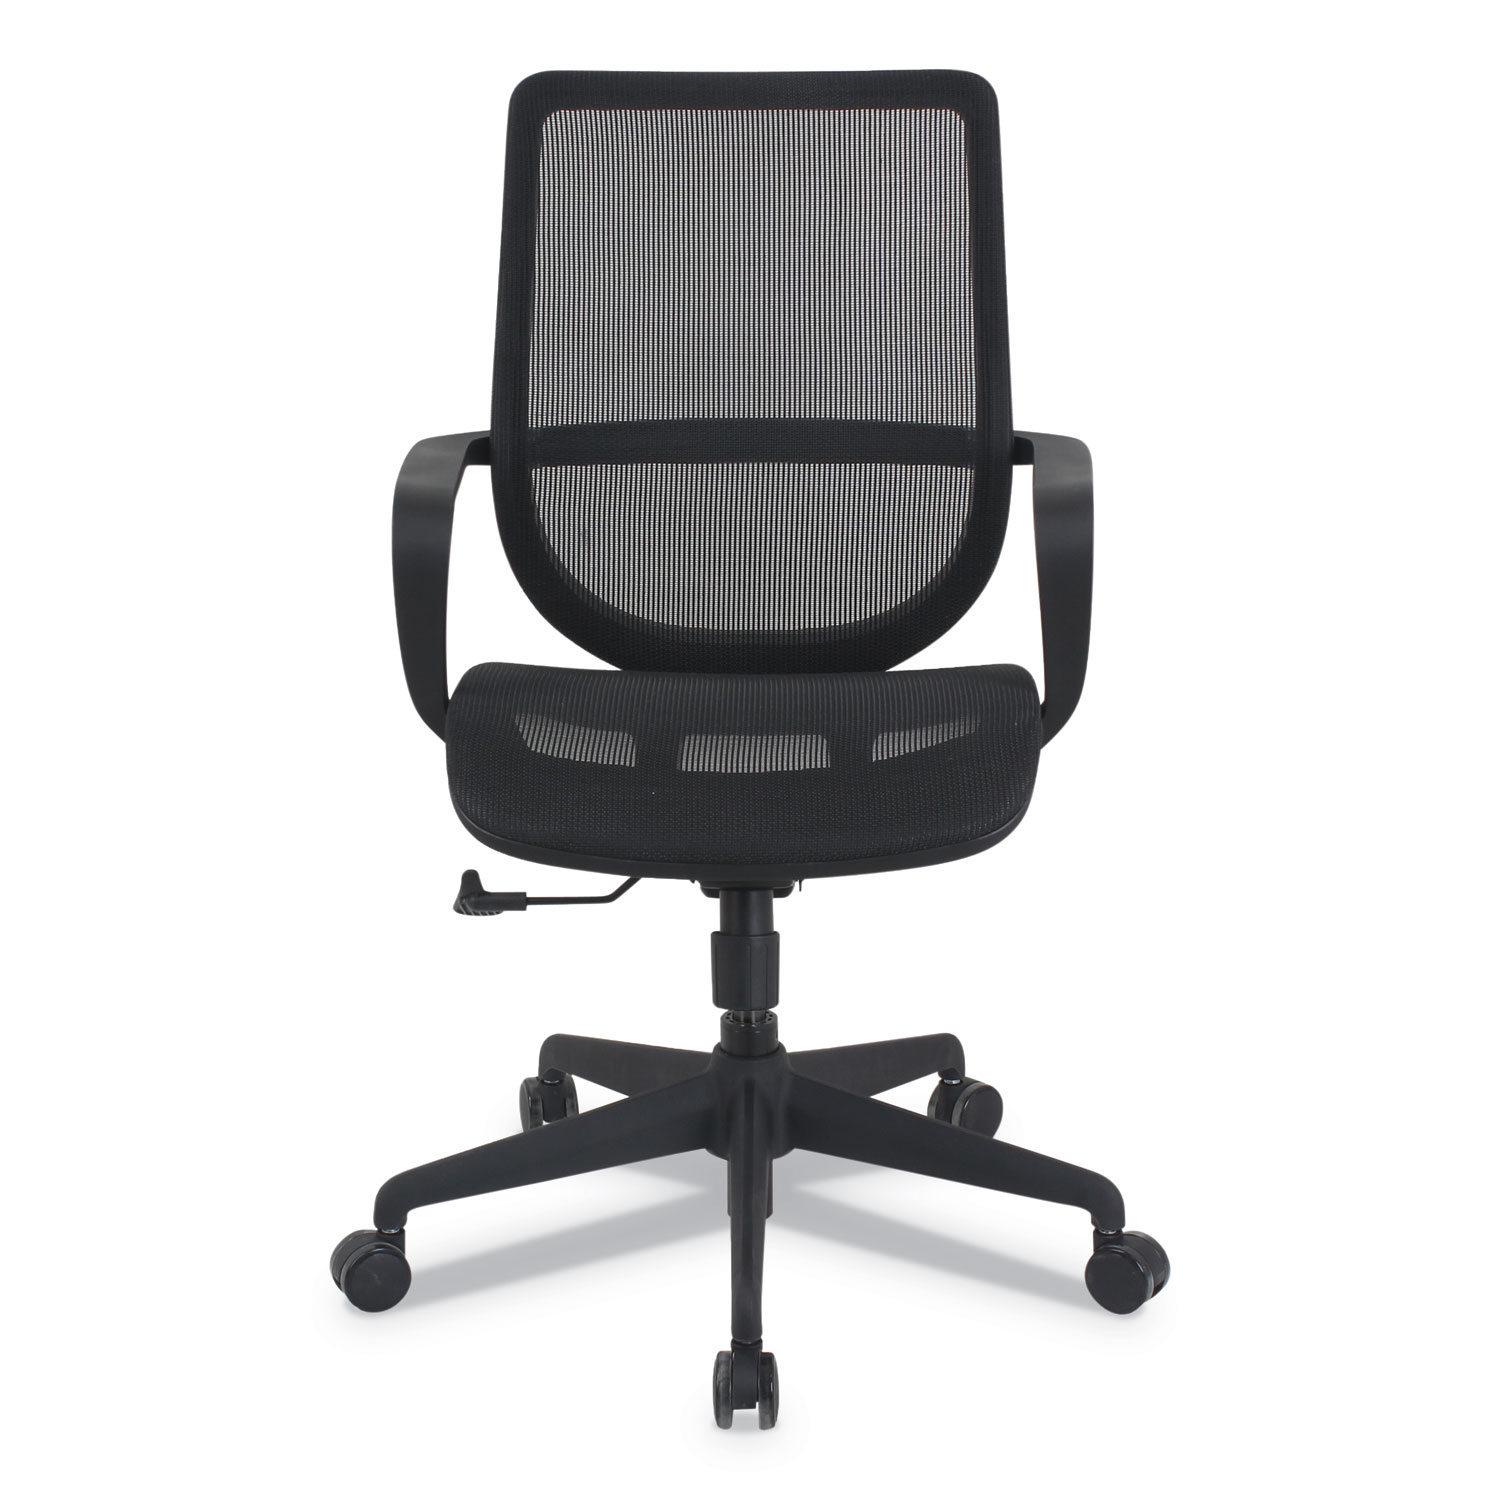 kathy ireland OFFICE by Alera Macklin Series Mid-Back All-Mesh Office Chair, Up to 275 lbs., Black Seat/Back, Black Base